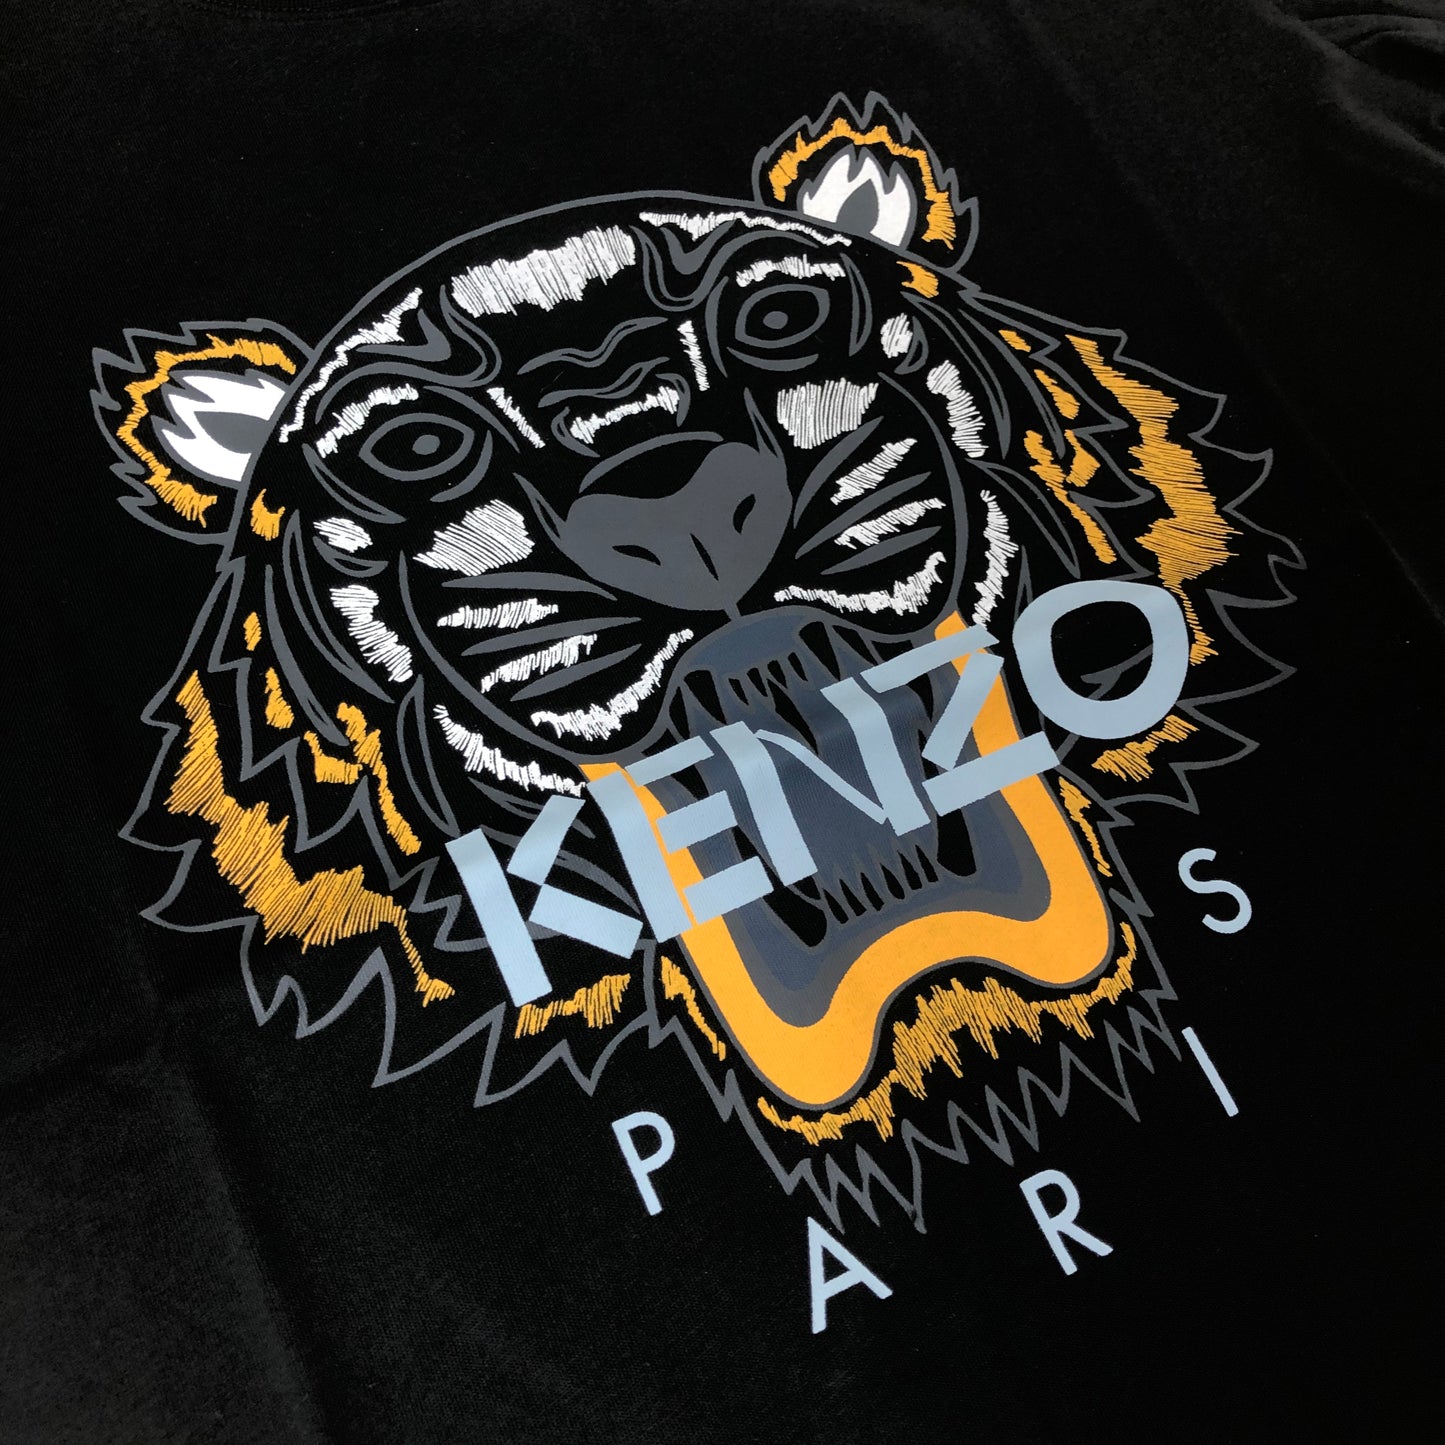 Kenzo Yellow Tiger Logo T-Shirt - Shop Streetwear, Sneakers, Slippers and Gifts online | Malaysia - The Factory KL